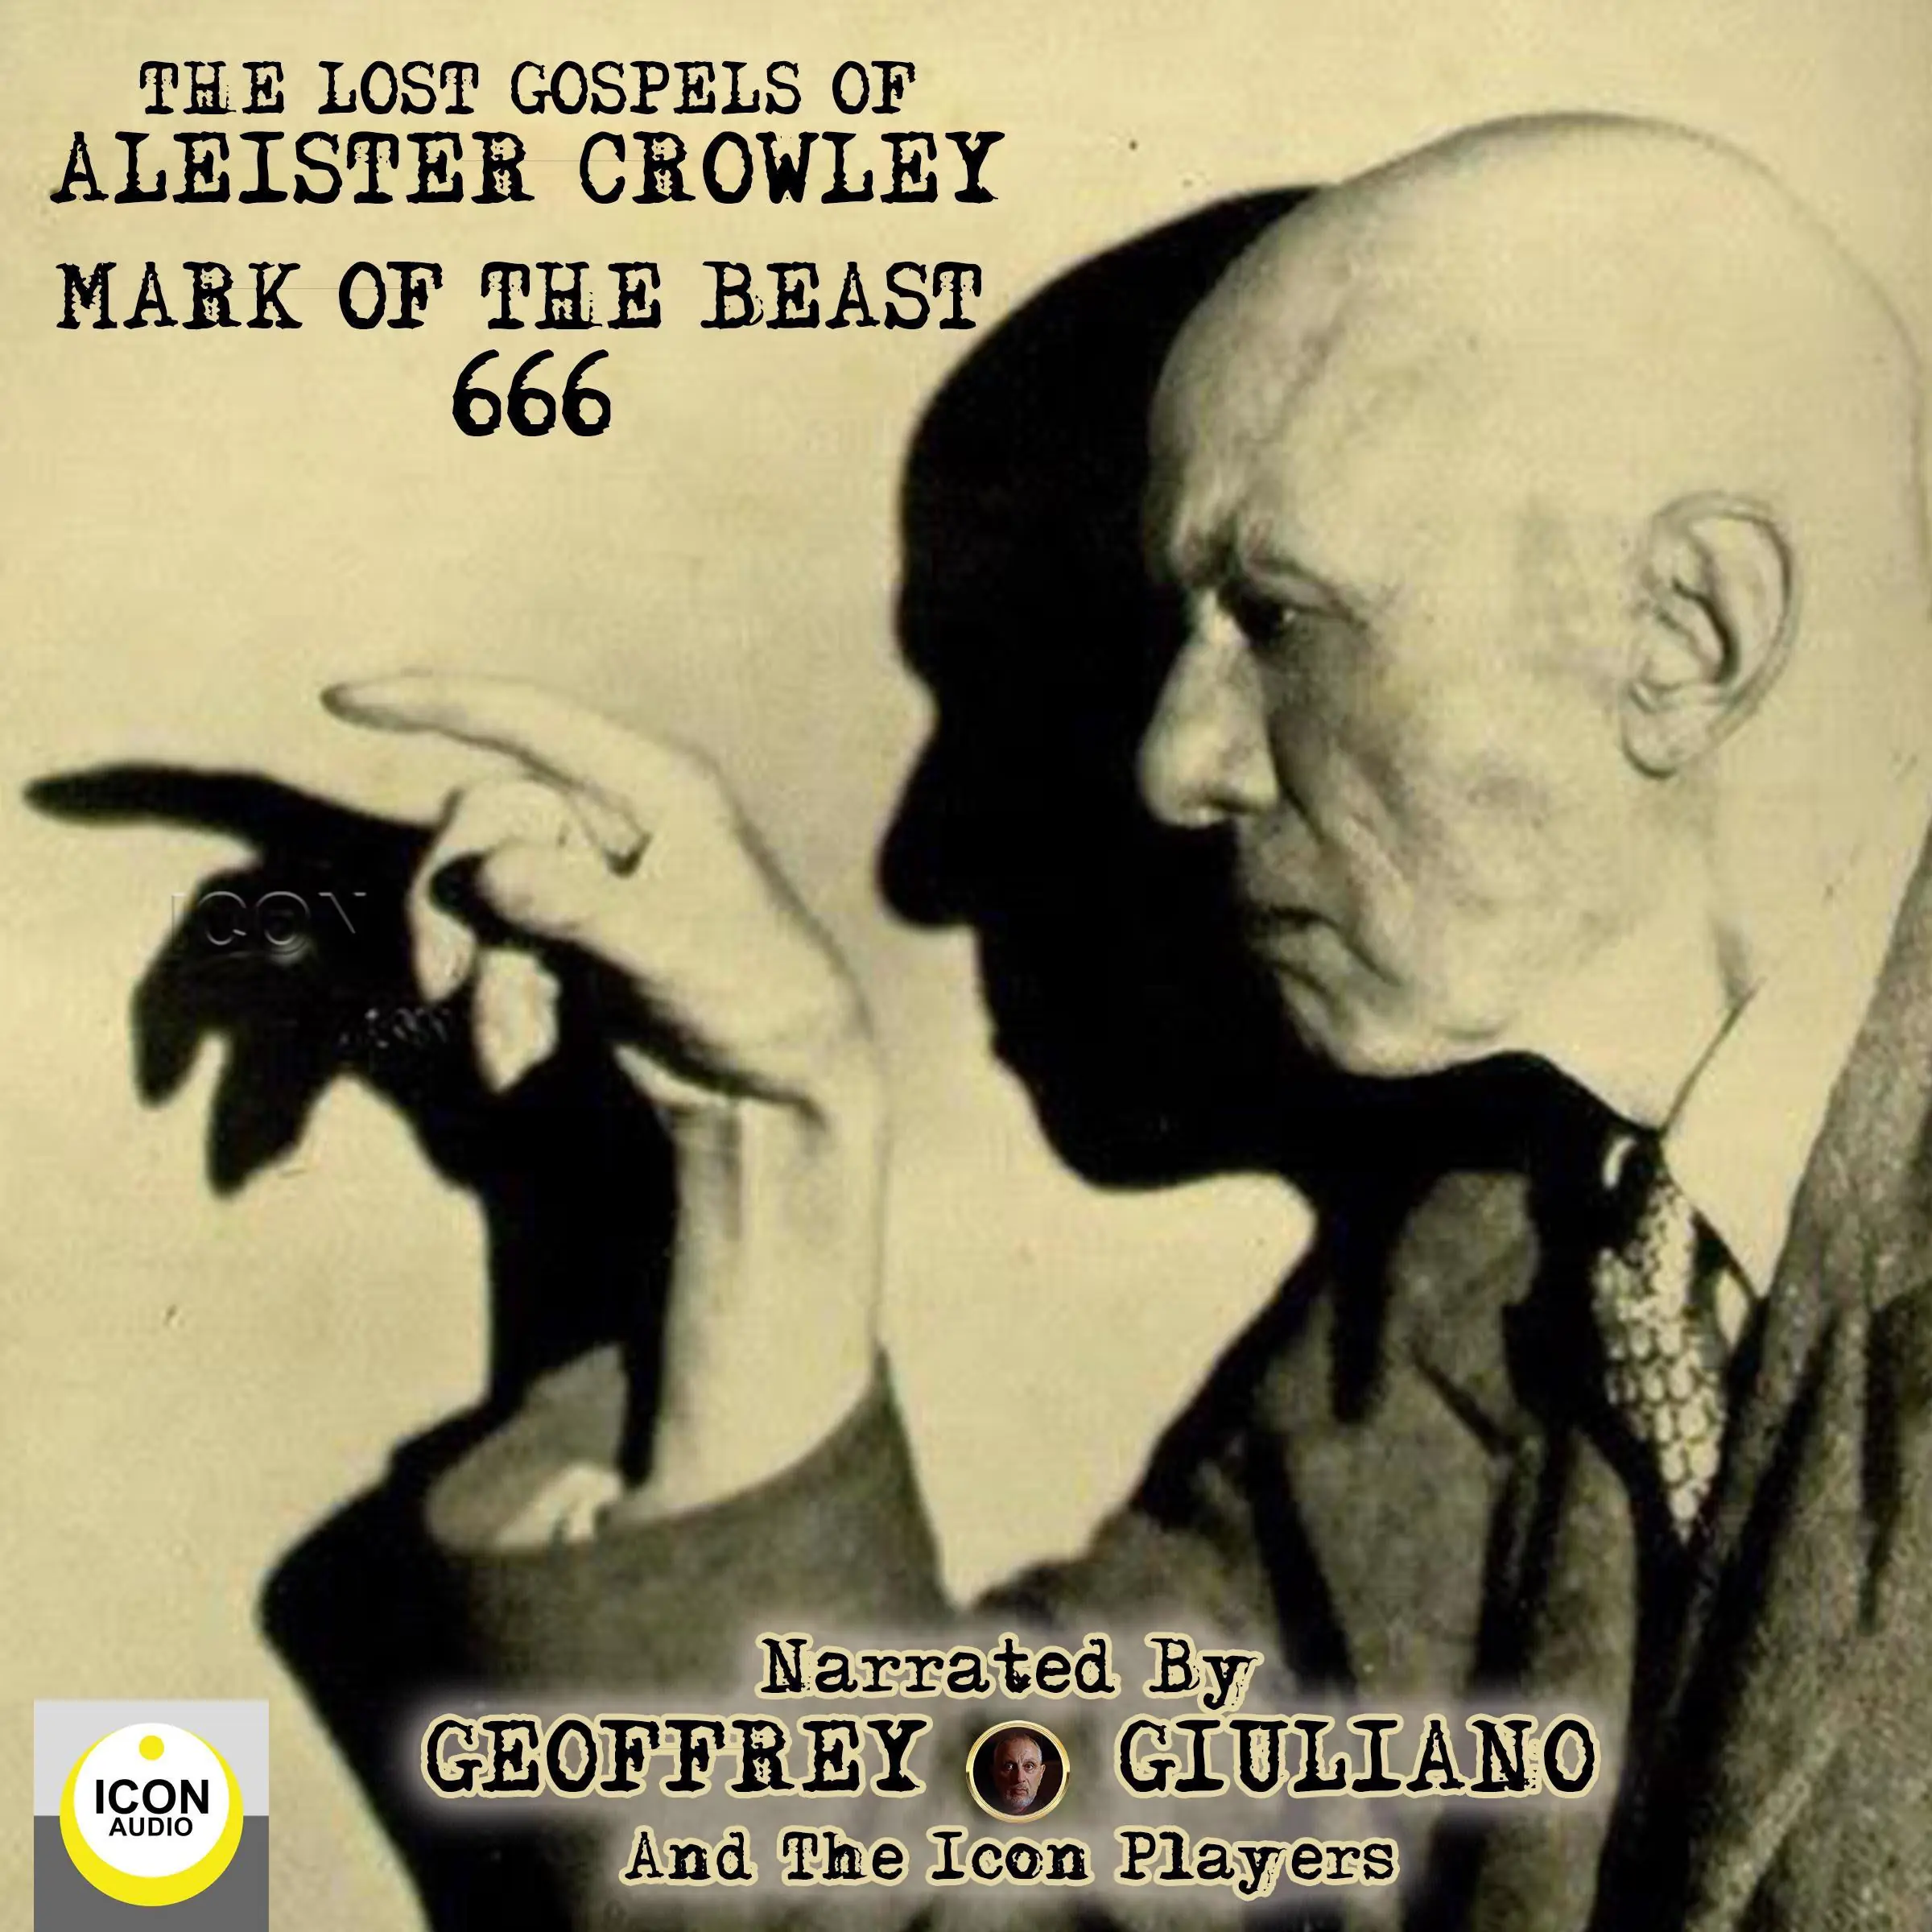 The Lost Gospels of Aleister Crowley Mark of the Beast 666 by Aleister Crowley Audiobook